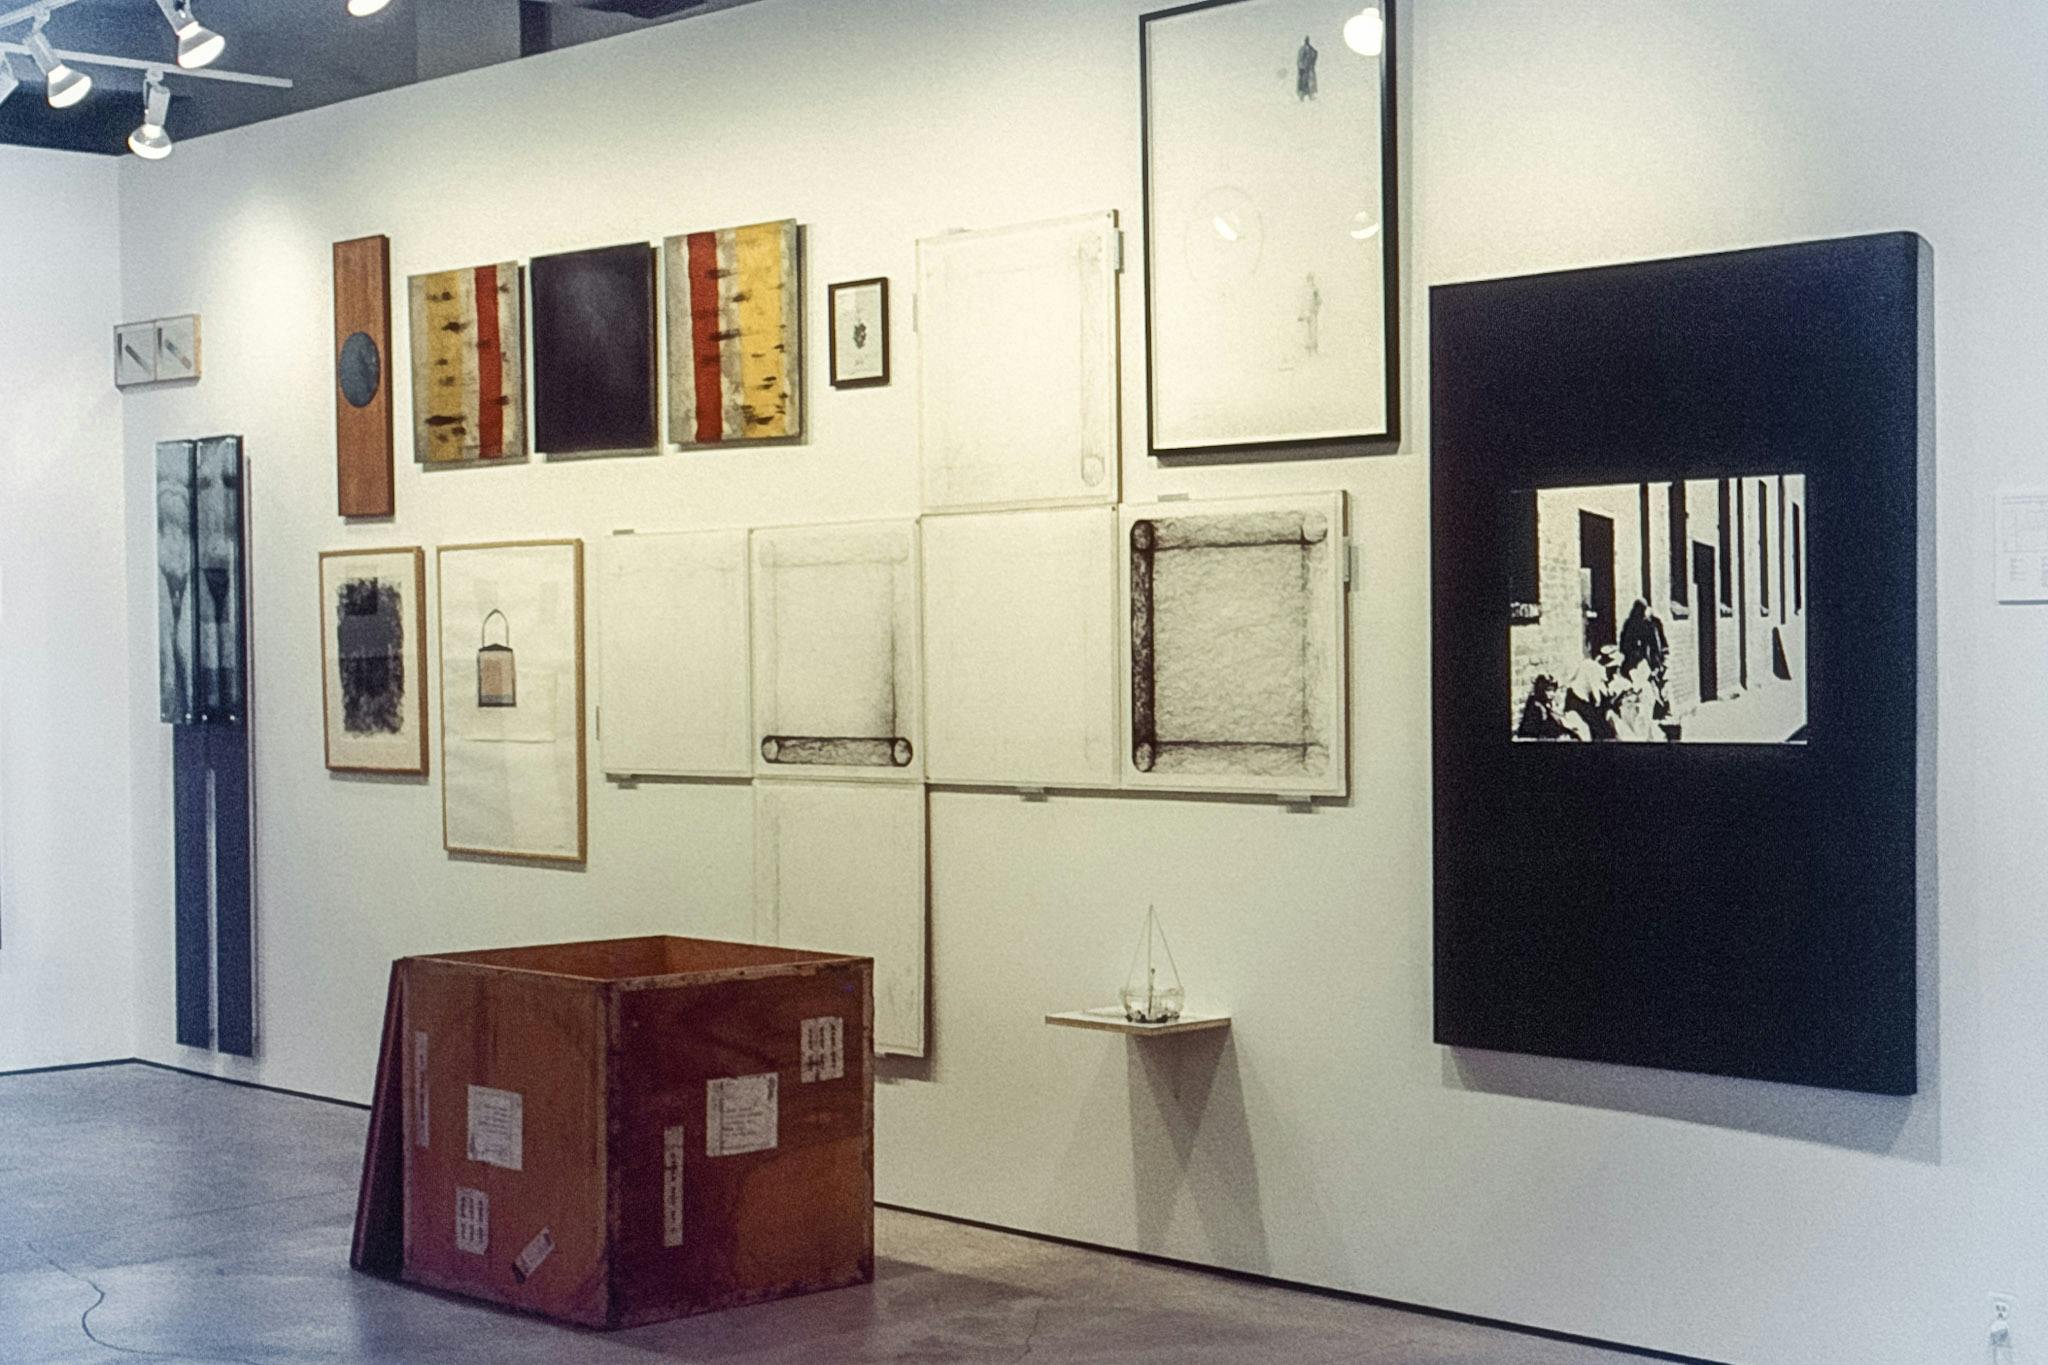 A photo of various artworks mounted on the gallery wall. Most of the paintings and photographs are black and white. There is also a large wooden box with multiple labels sitting in front of the wall. 